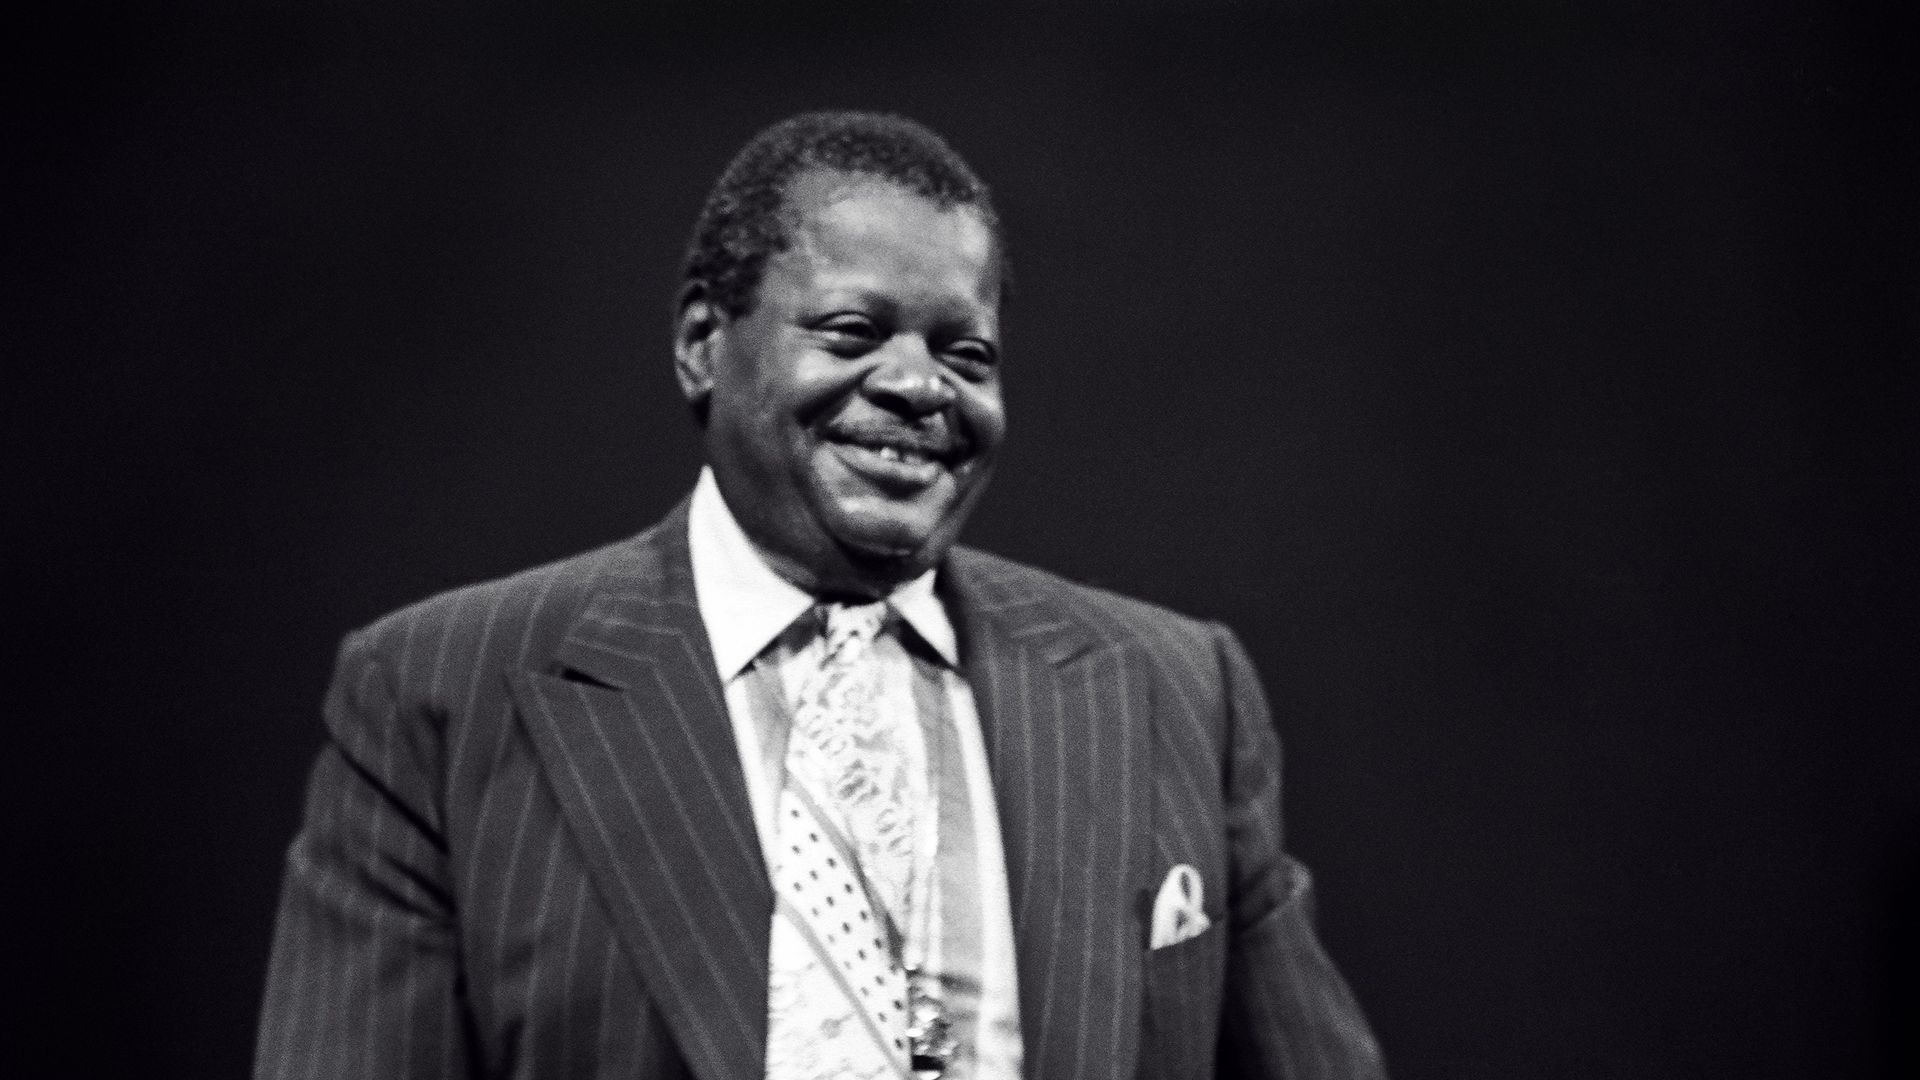 My One And Only Love av Oscar Peterson